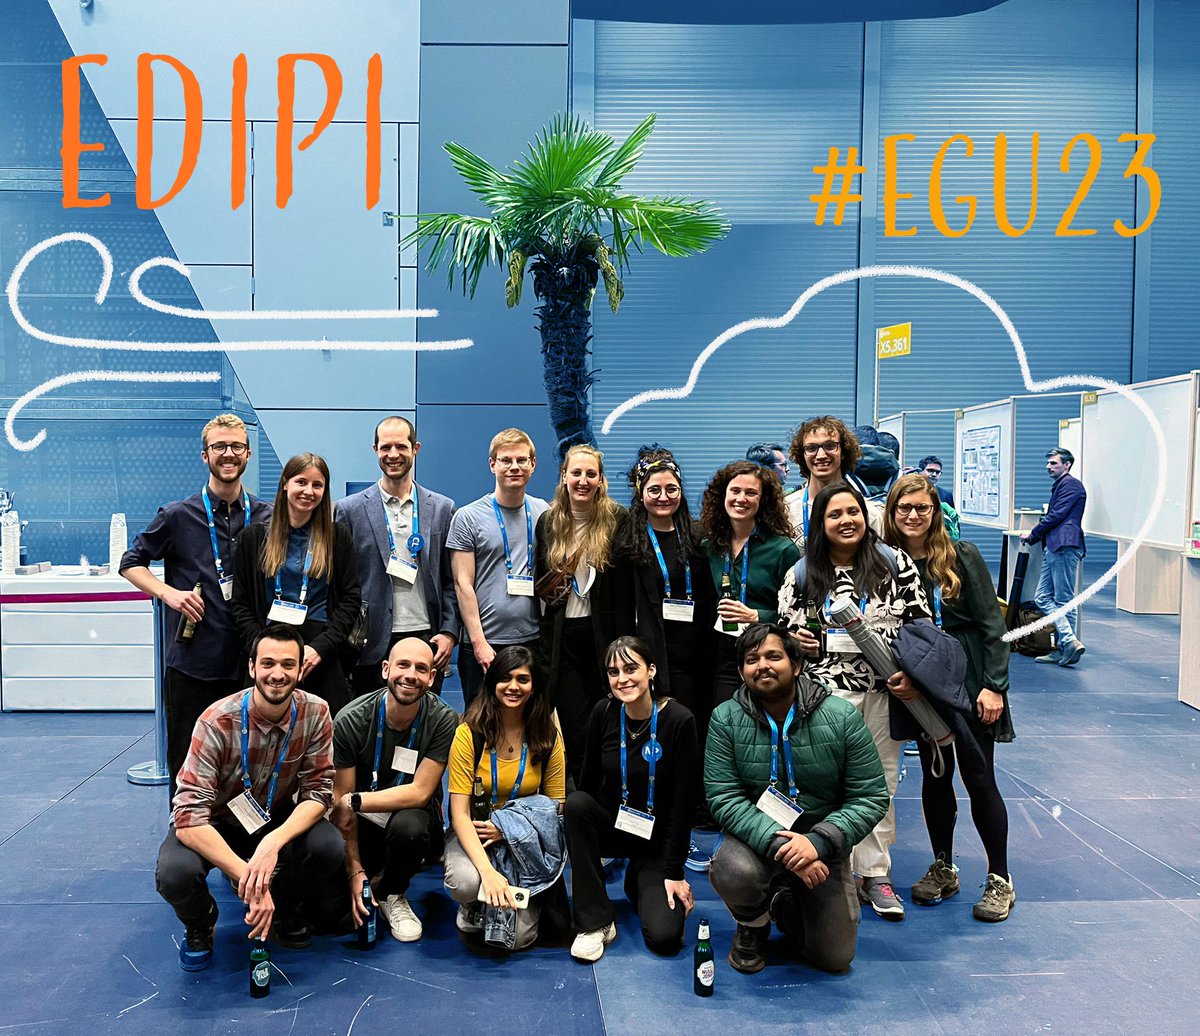 Last week EDIPI had 14 #earlycareer #researchers presenting in #egu23. 
🎖 Thanks to the amazing team that made it possible!
See you all next year at #egu24

More innovative research on #extremeweather events at: edipi-itn.eu